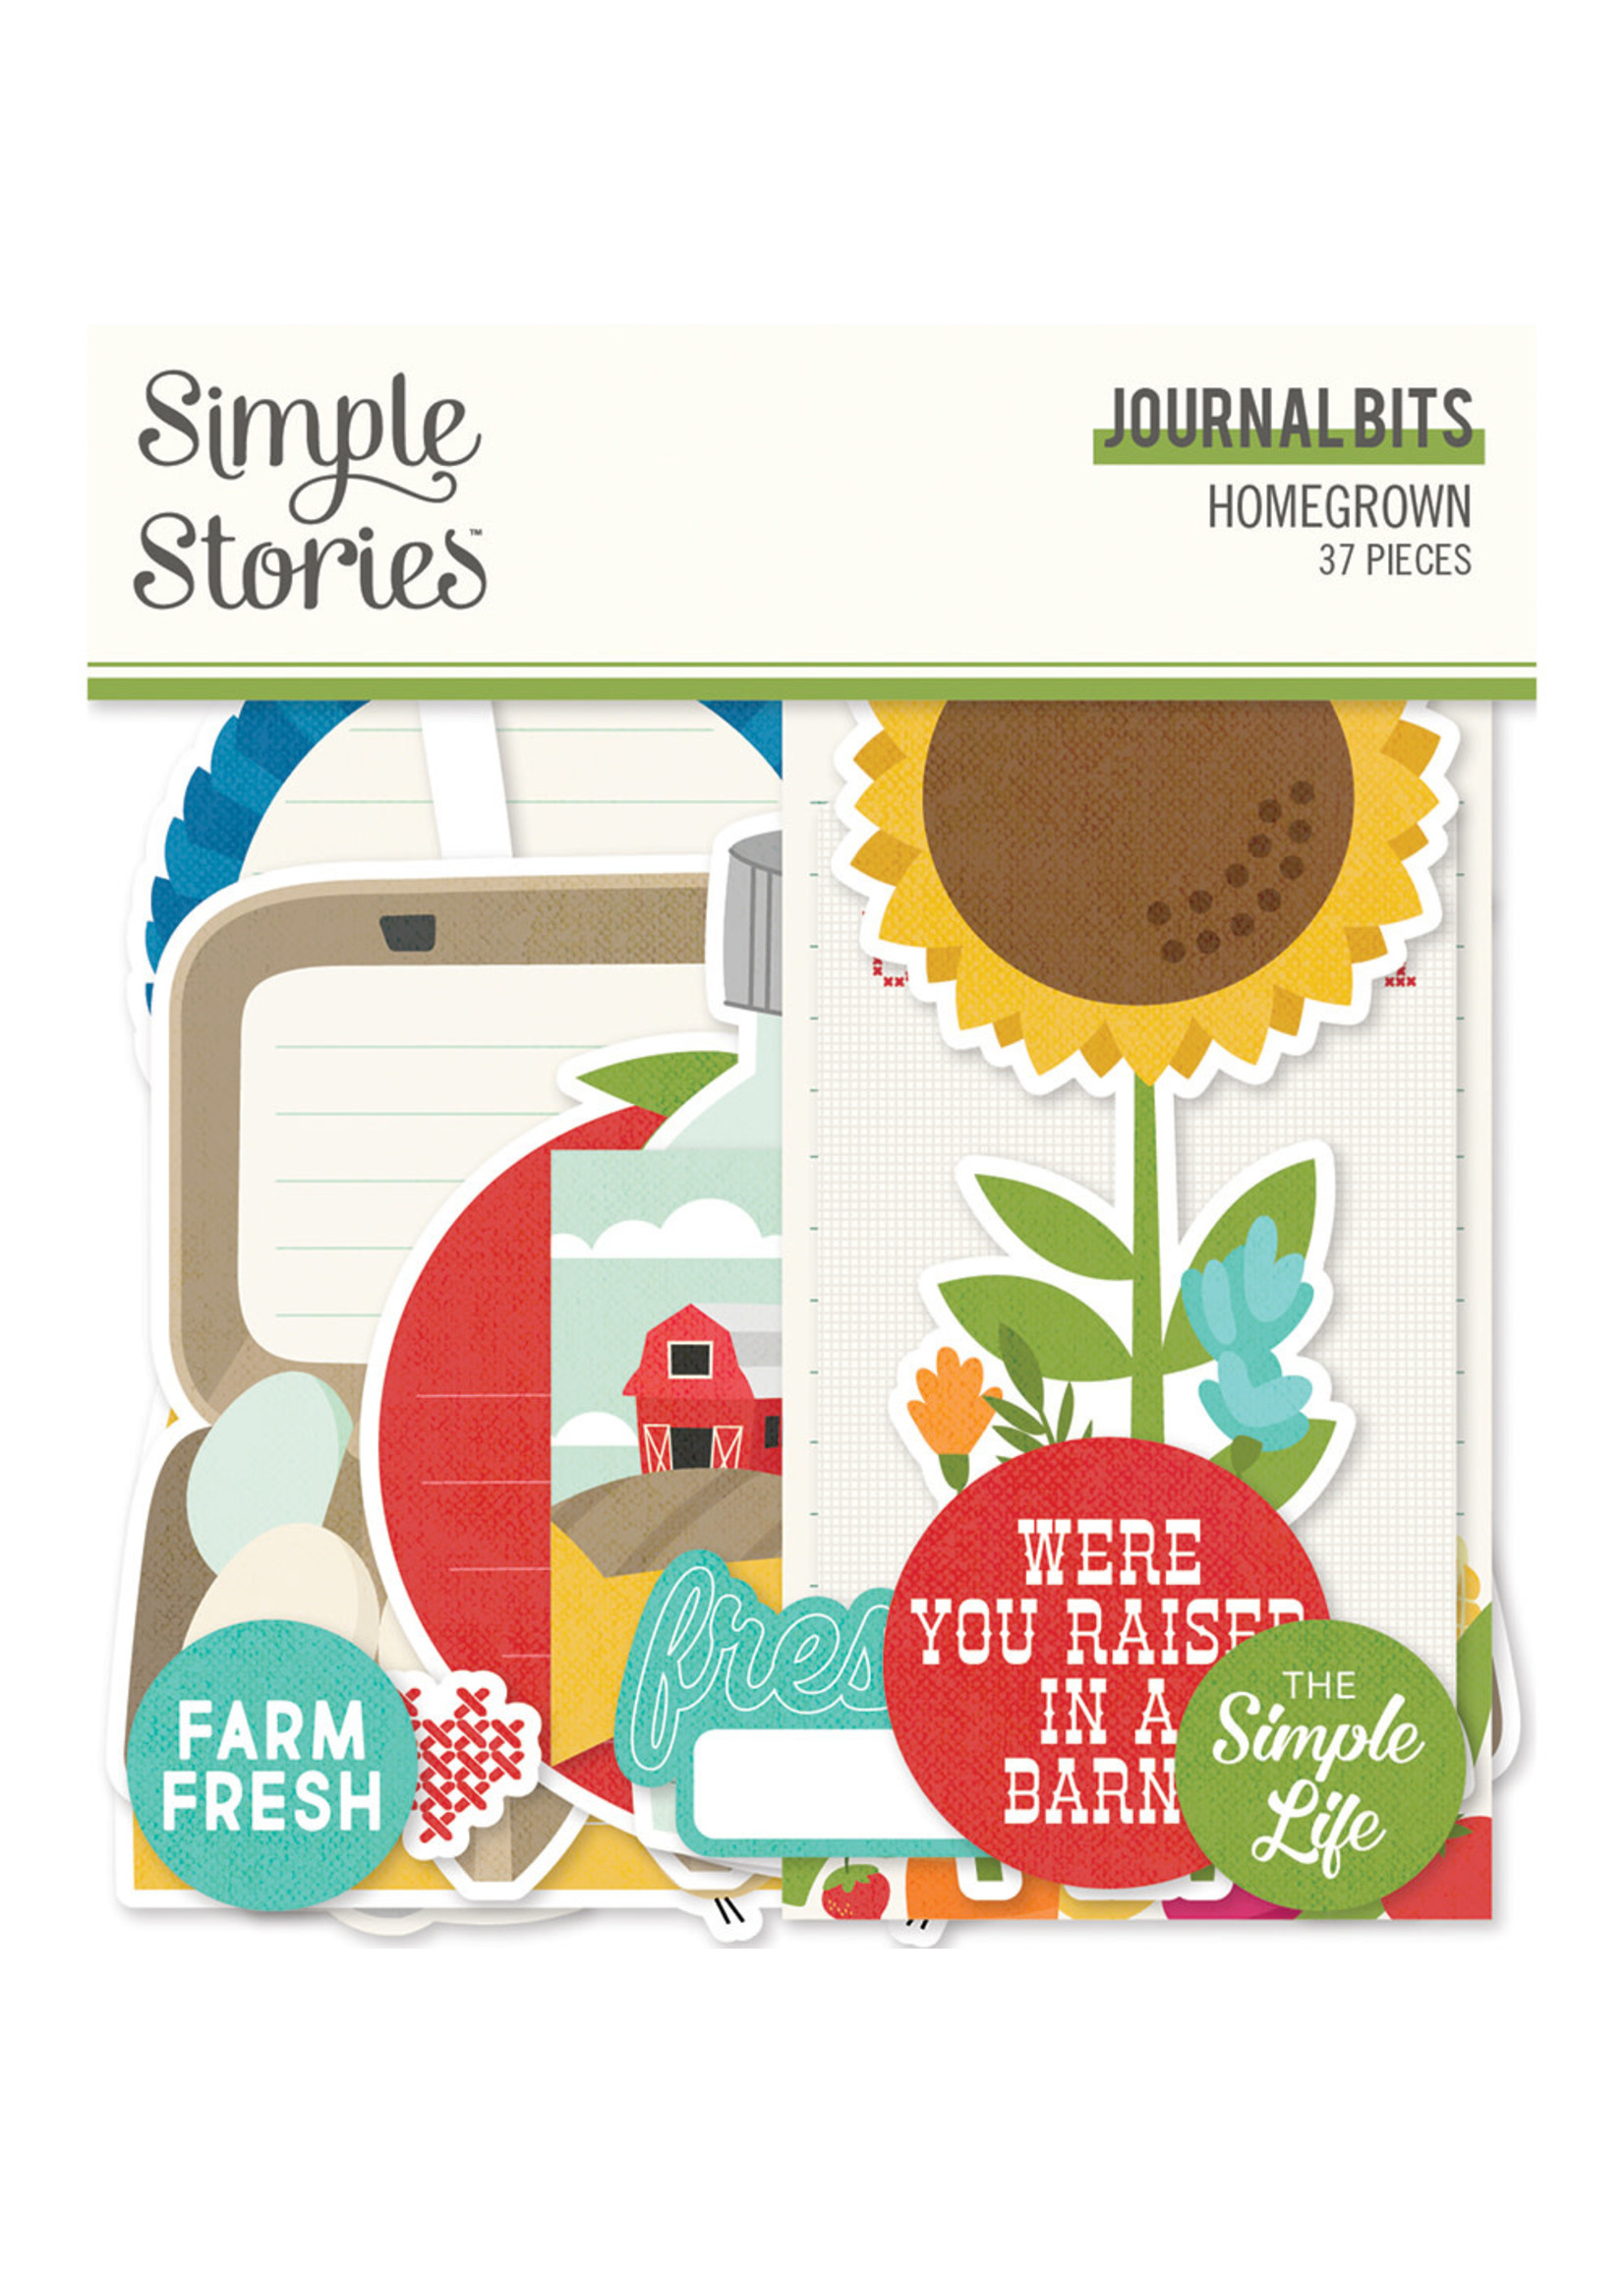 Simple Stories Homegrown  - Journal Bits